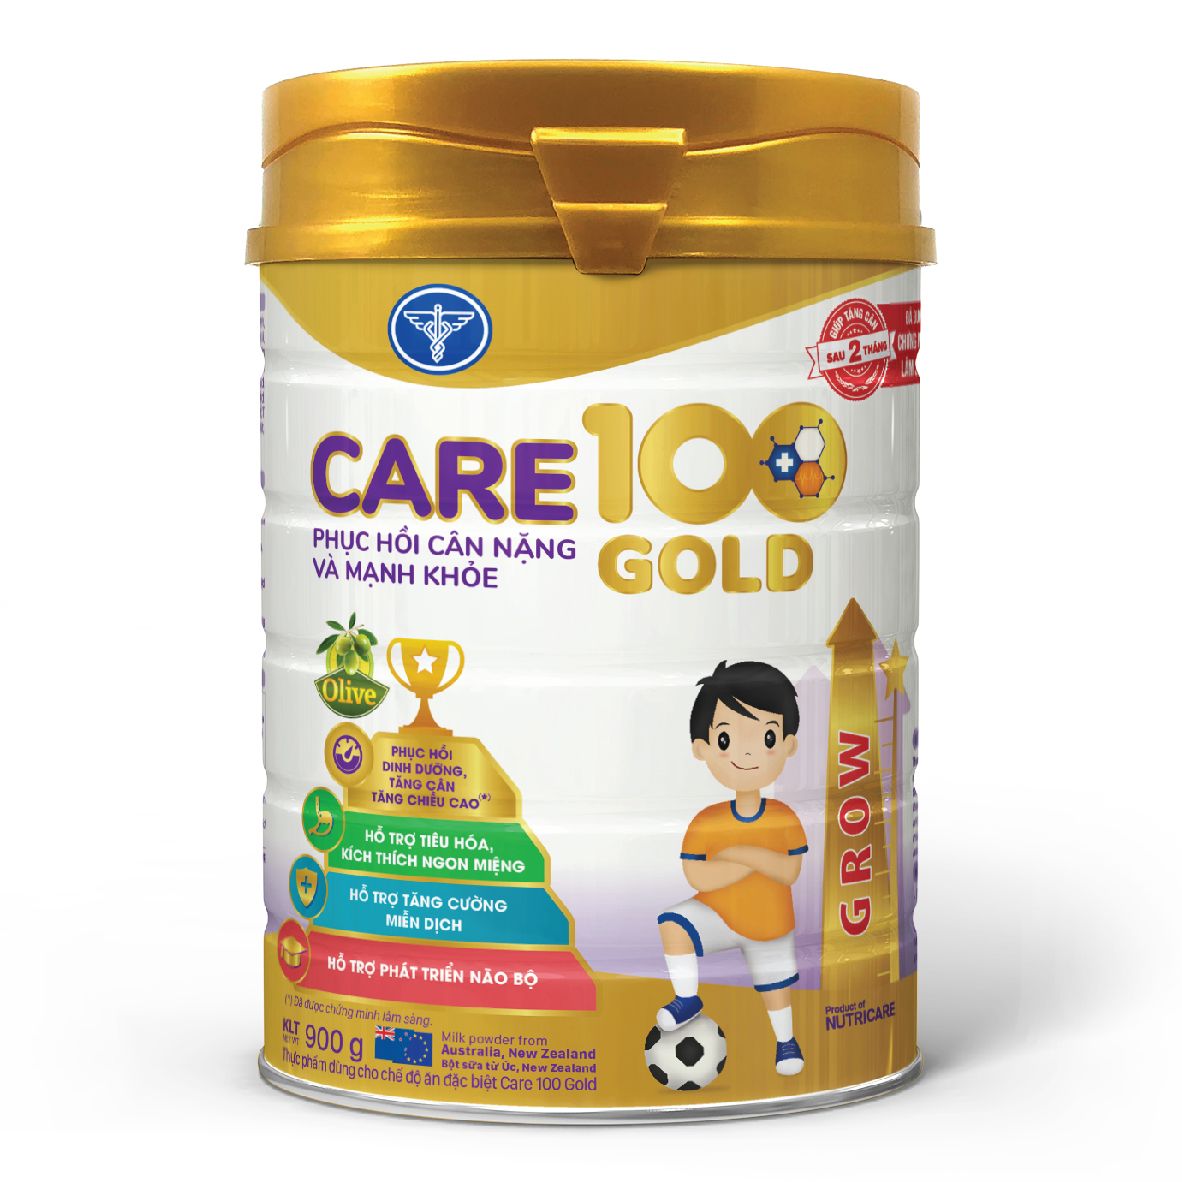  SỮA BỘT CARE 100 GOLD 